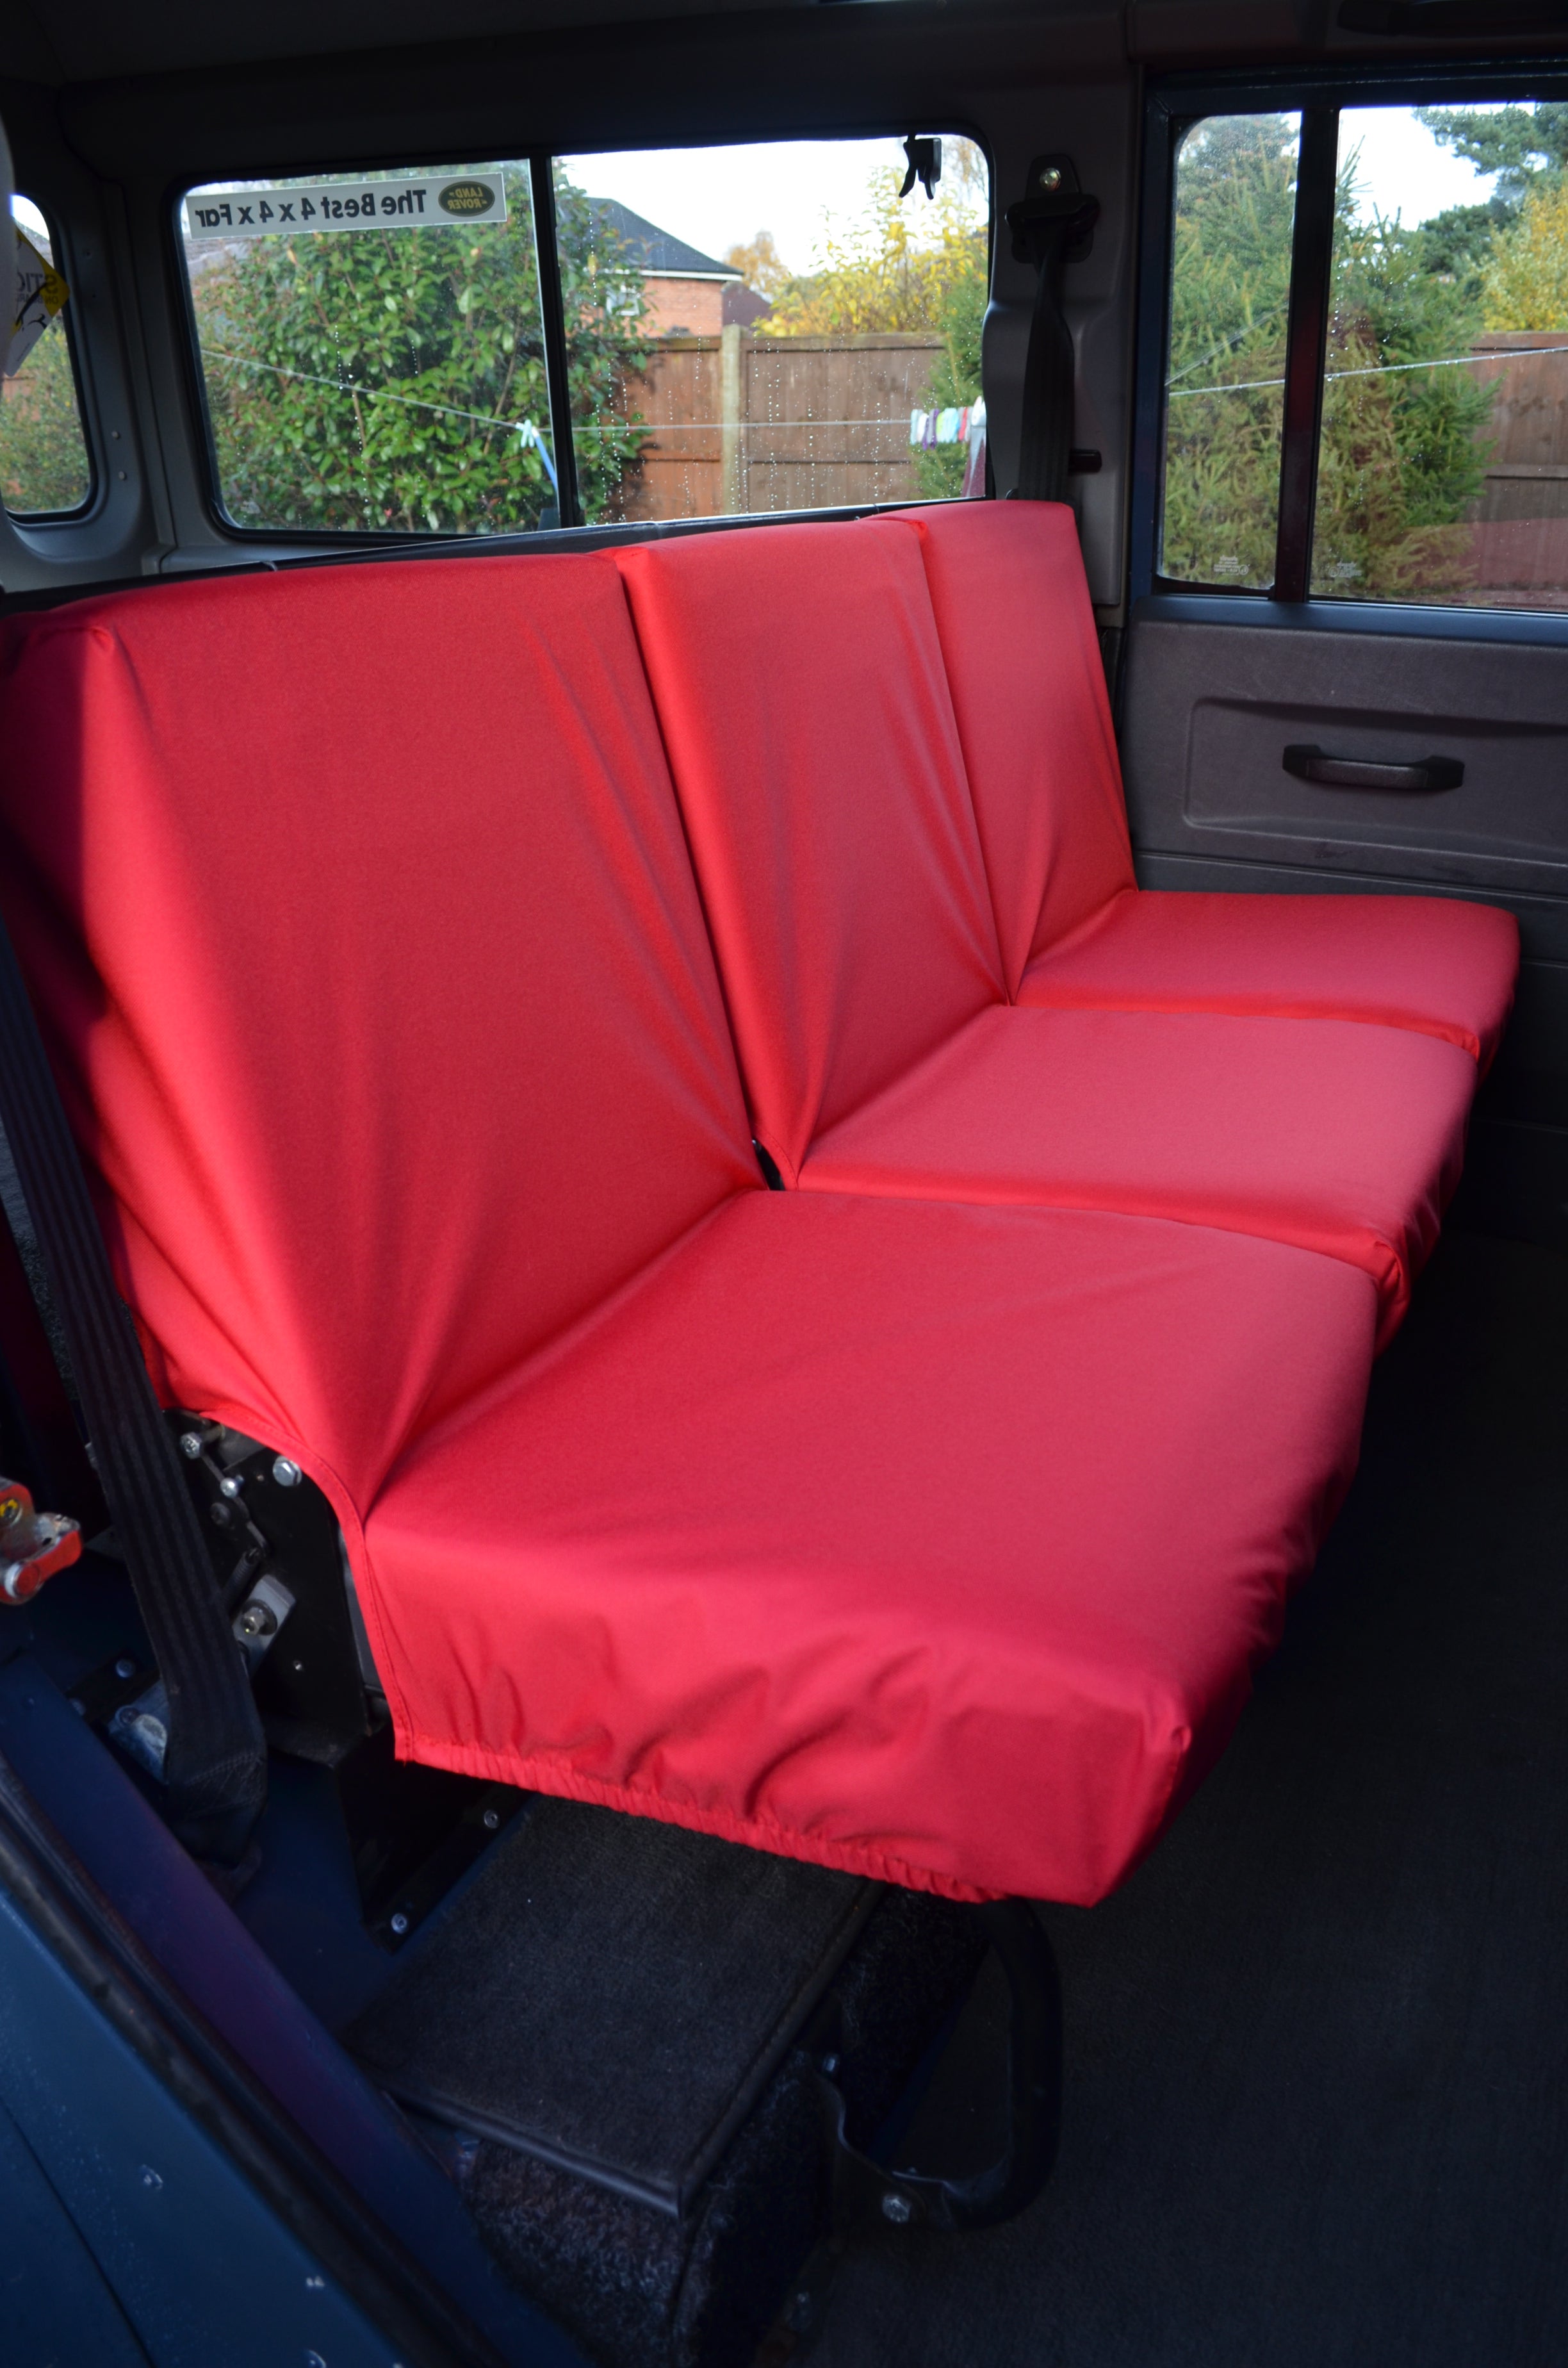 Land Rover Defender 1983 - 2007 Rear Seat Covers 2nd Row 3 Singles / Red Turtle Covers Ltd